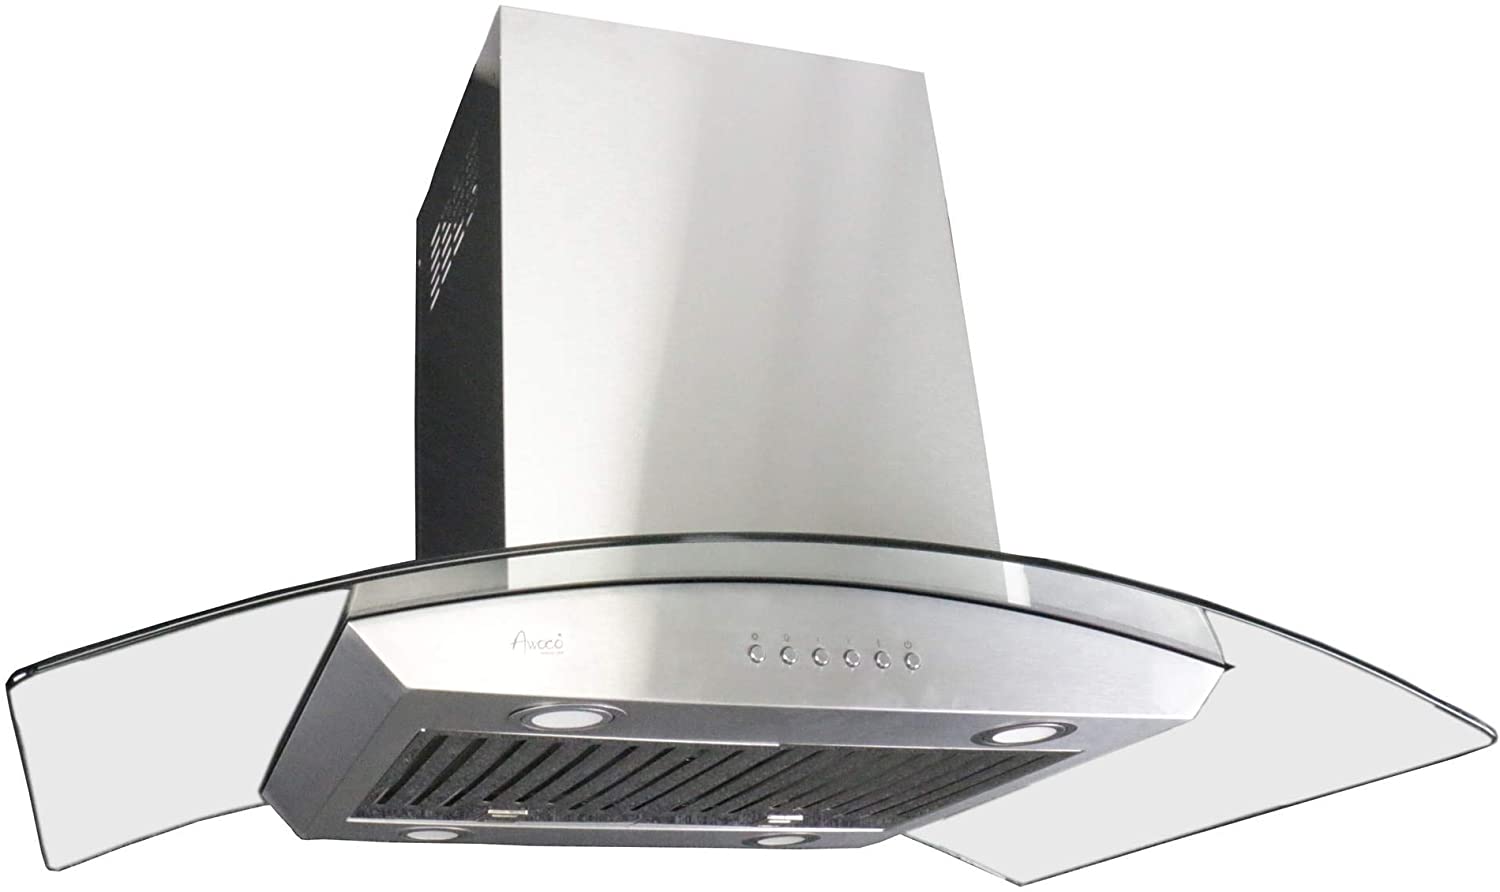 Awoco RH-ISG-36 6” Round Vent 1mm Thick Stainless Steel Island Mounted 4 Speeds 900CFM Range Hood with 4 LED Lights, Baffle Filter, Soft Touch Electronic Control Panel